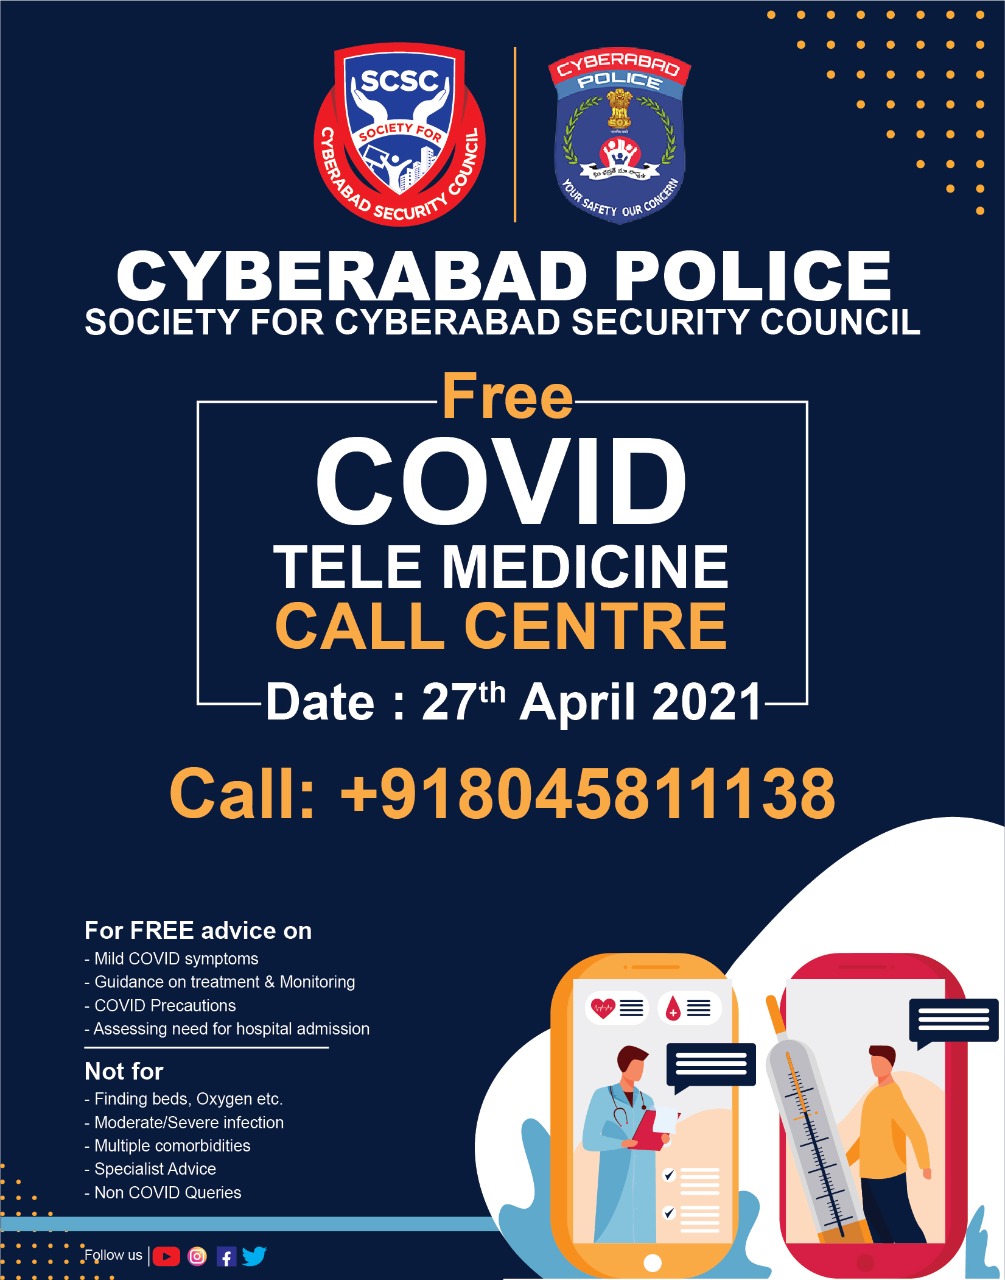 Cyberabad Police & SCSC Launches – COVID Telemedicine Consultation Call Centre Facility for Citizens of Hyderabad